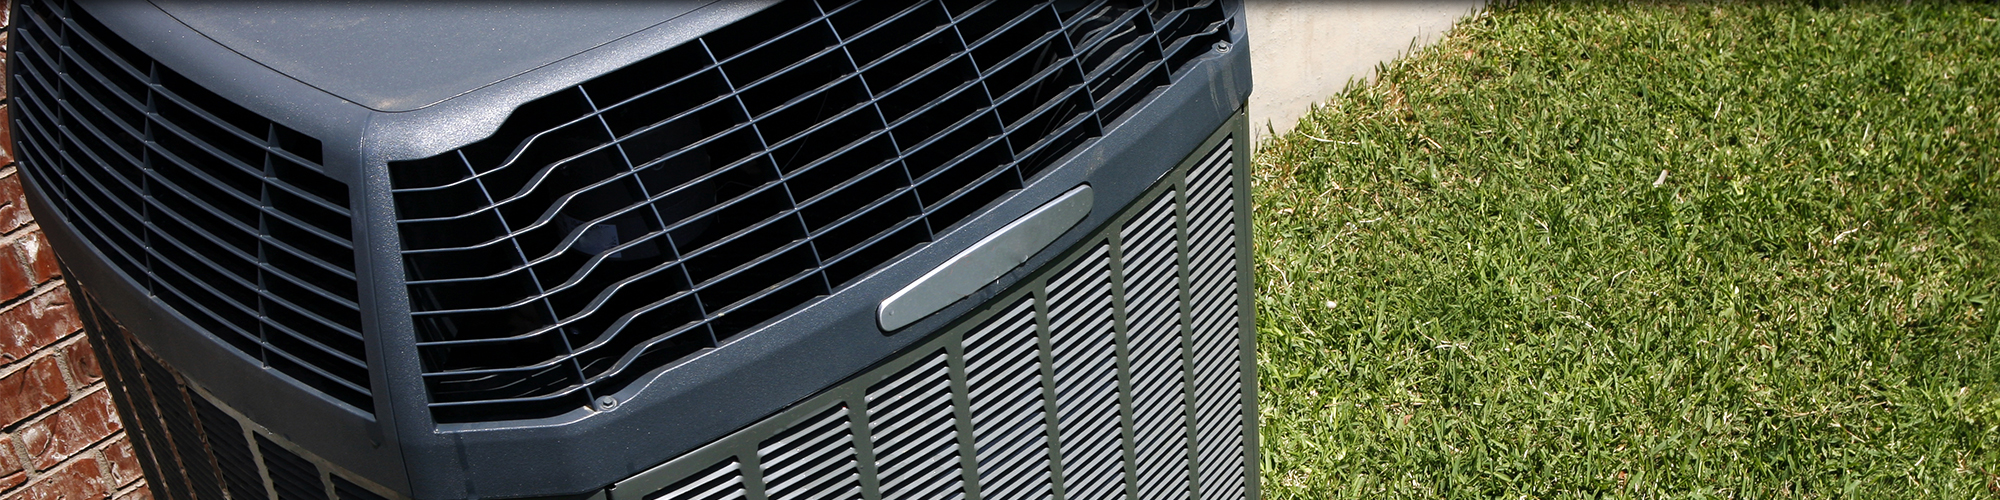 Heating and Air Conditioning in Houston, TX